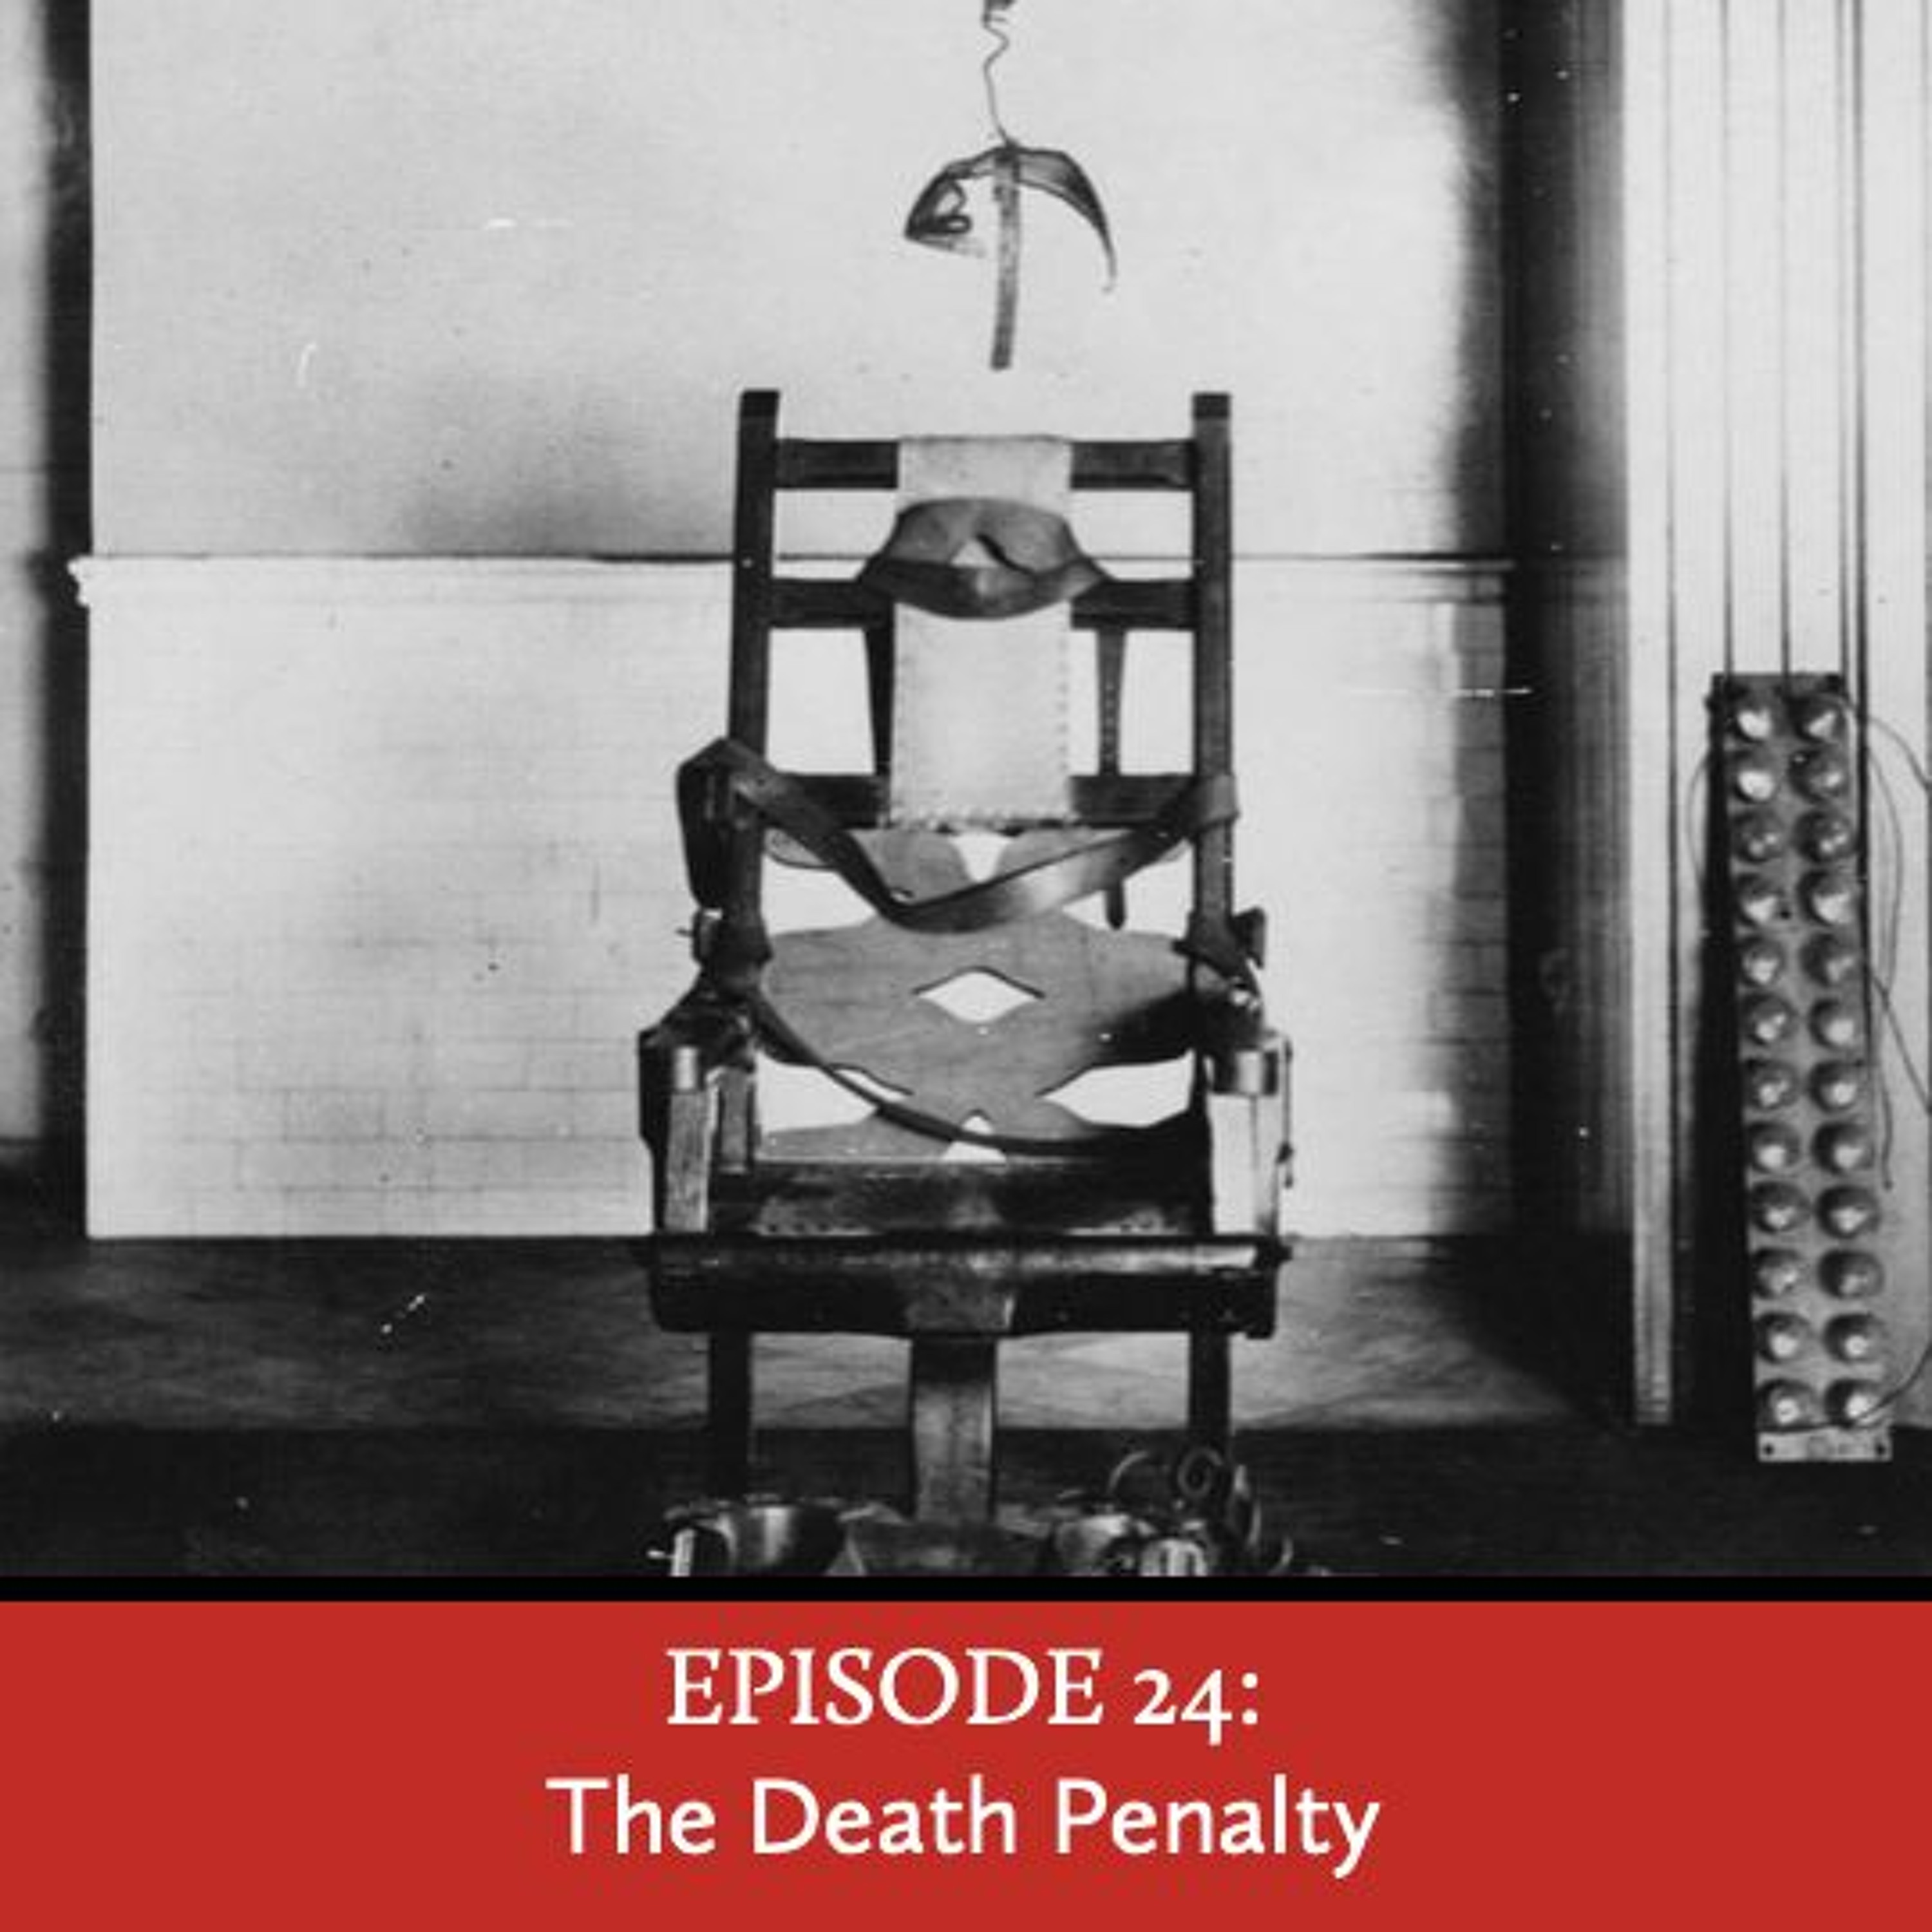 Episode 24: The Death Penalty